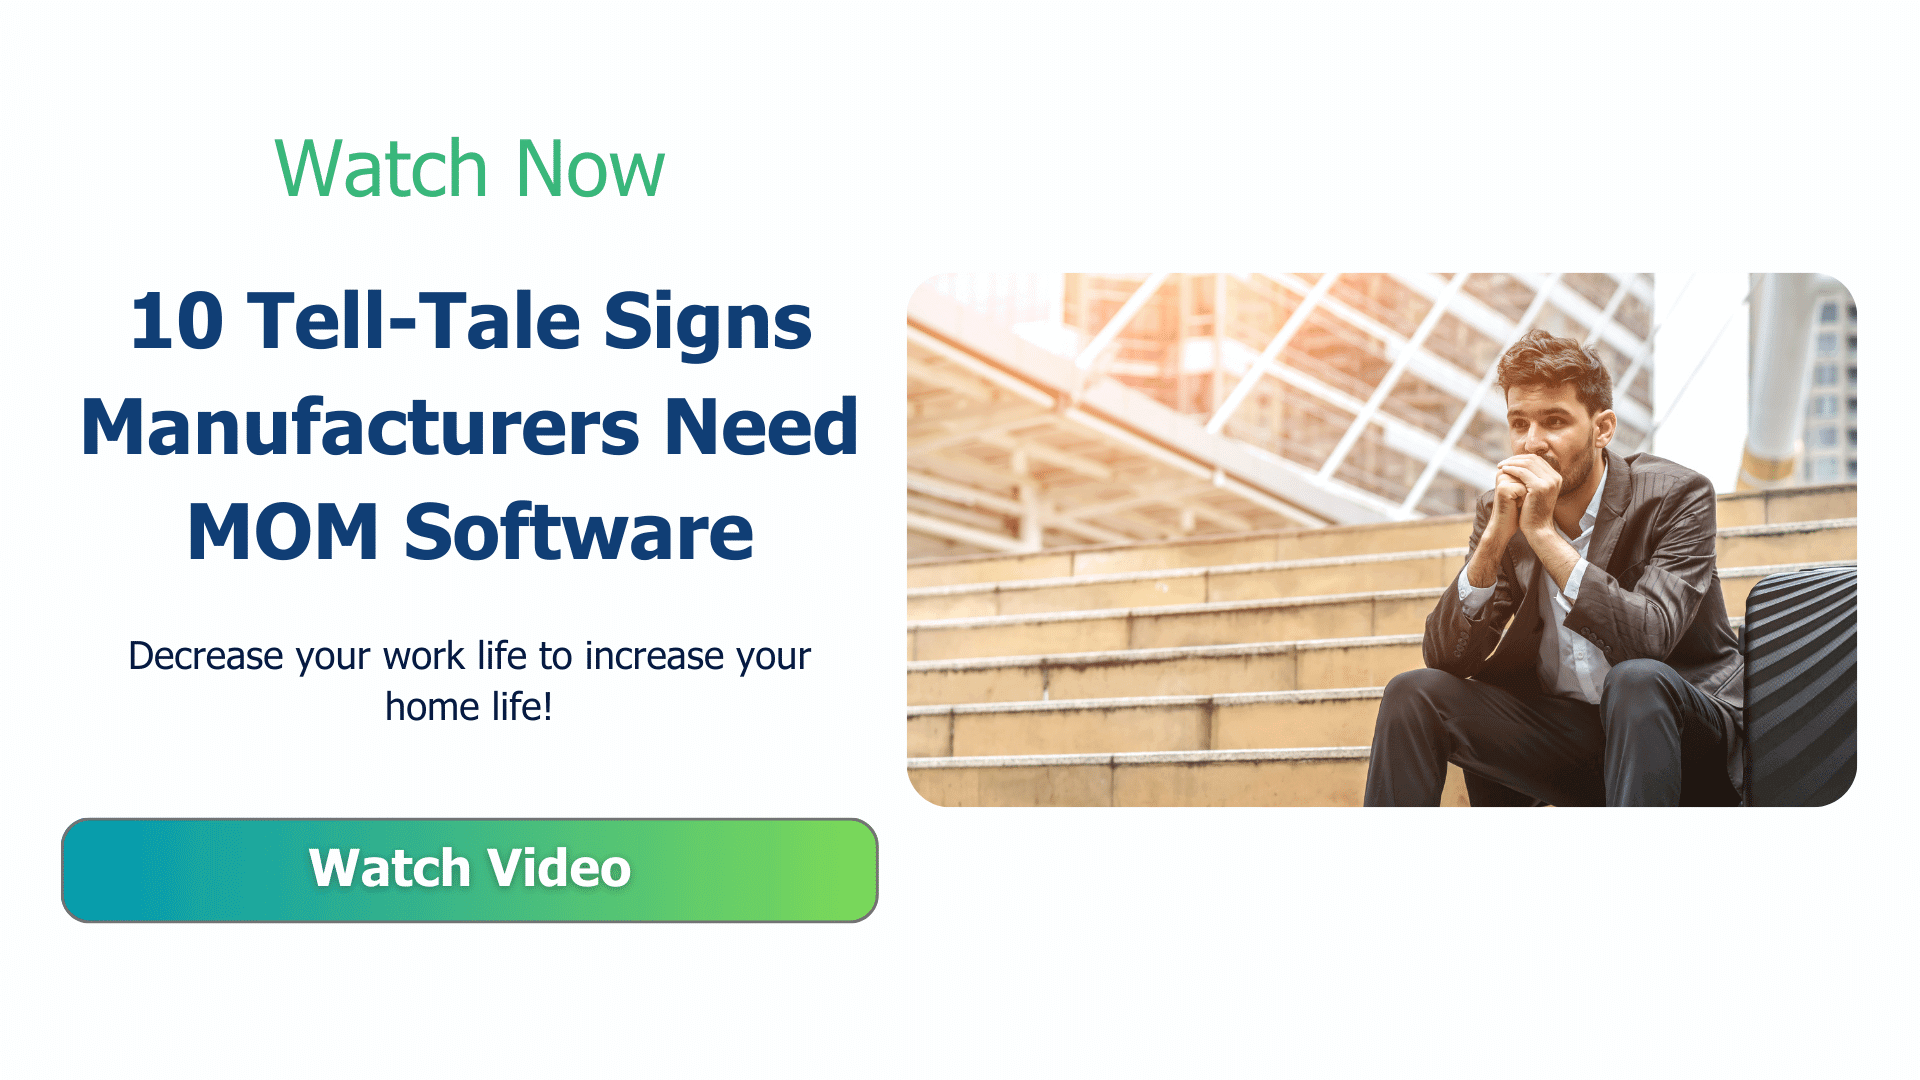 Watch video of the 10 tell-tale signs manufacturers need mom software.